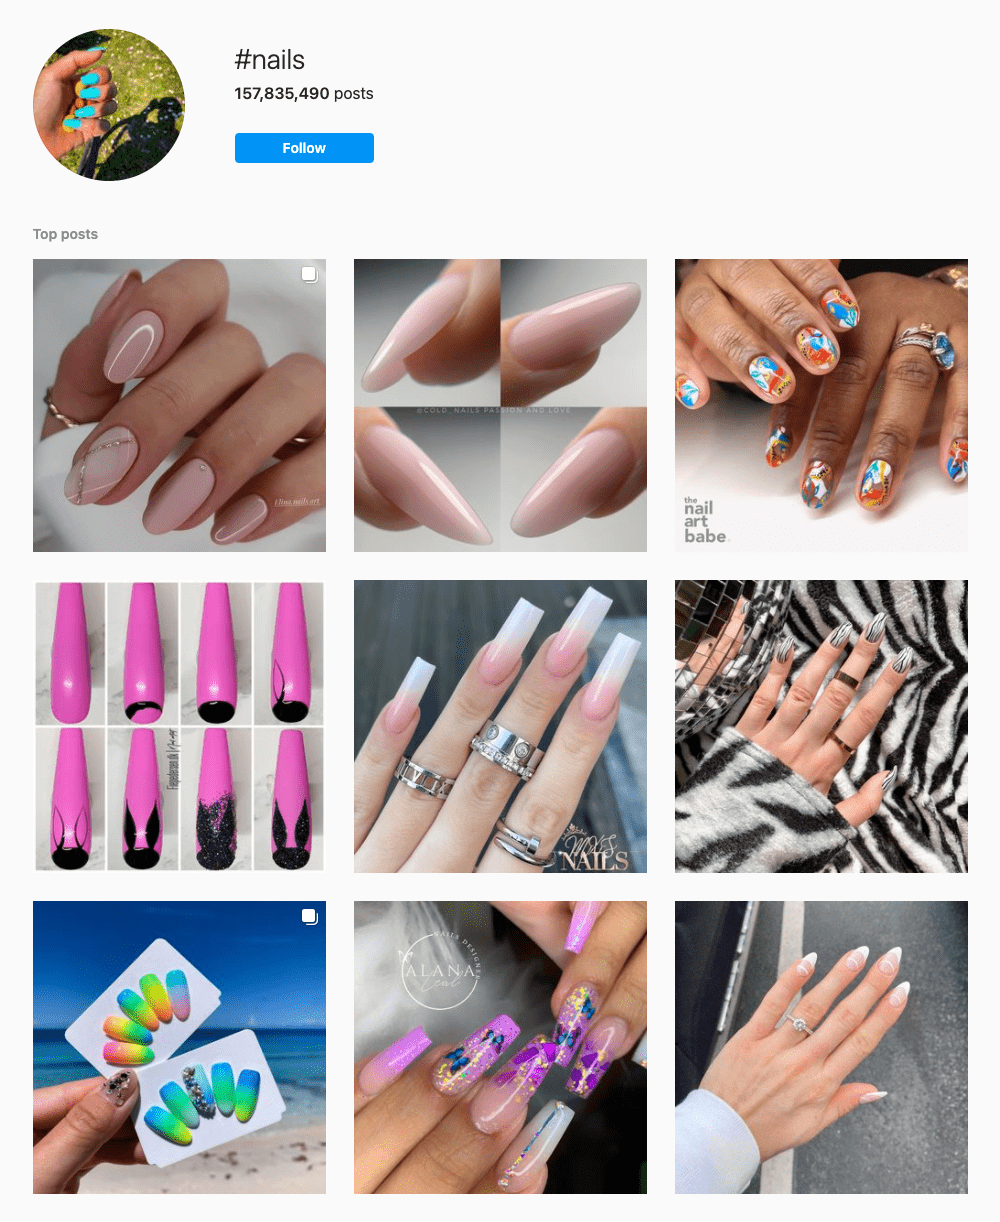 #nails Hashtags for Instagram